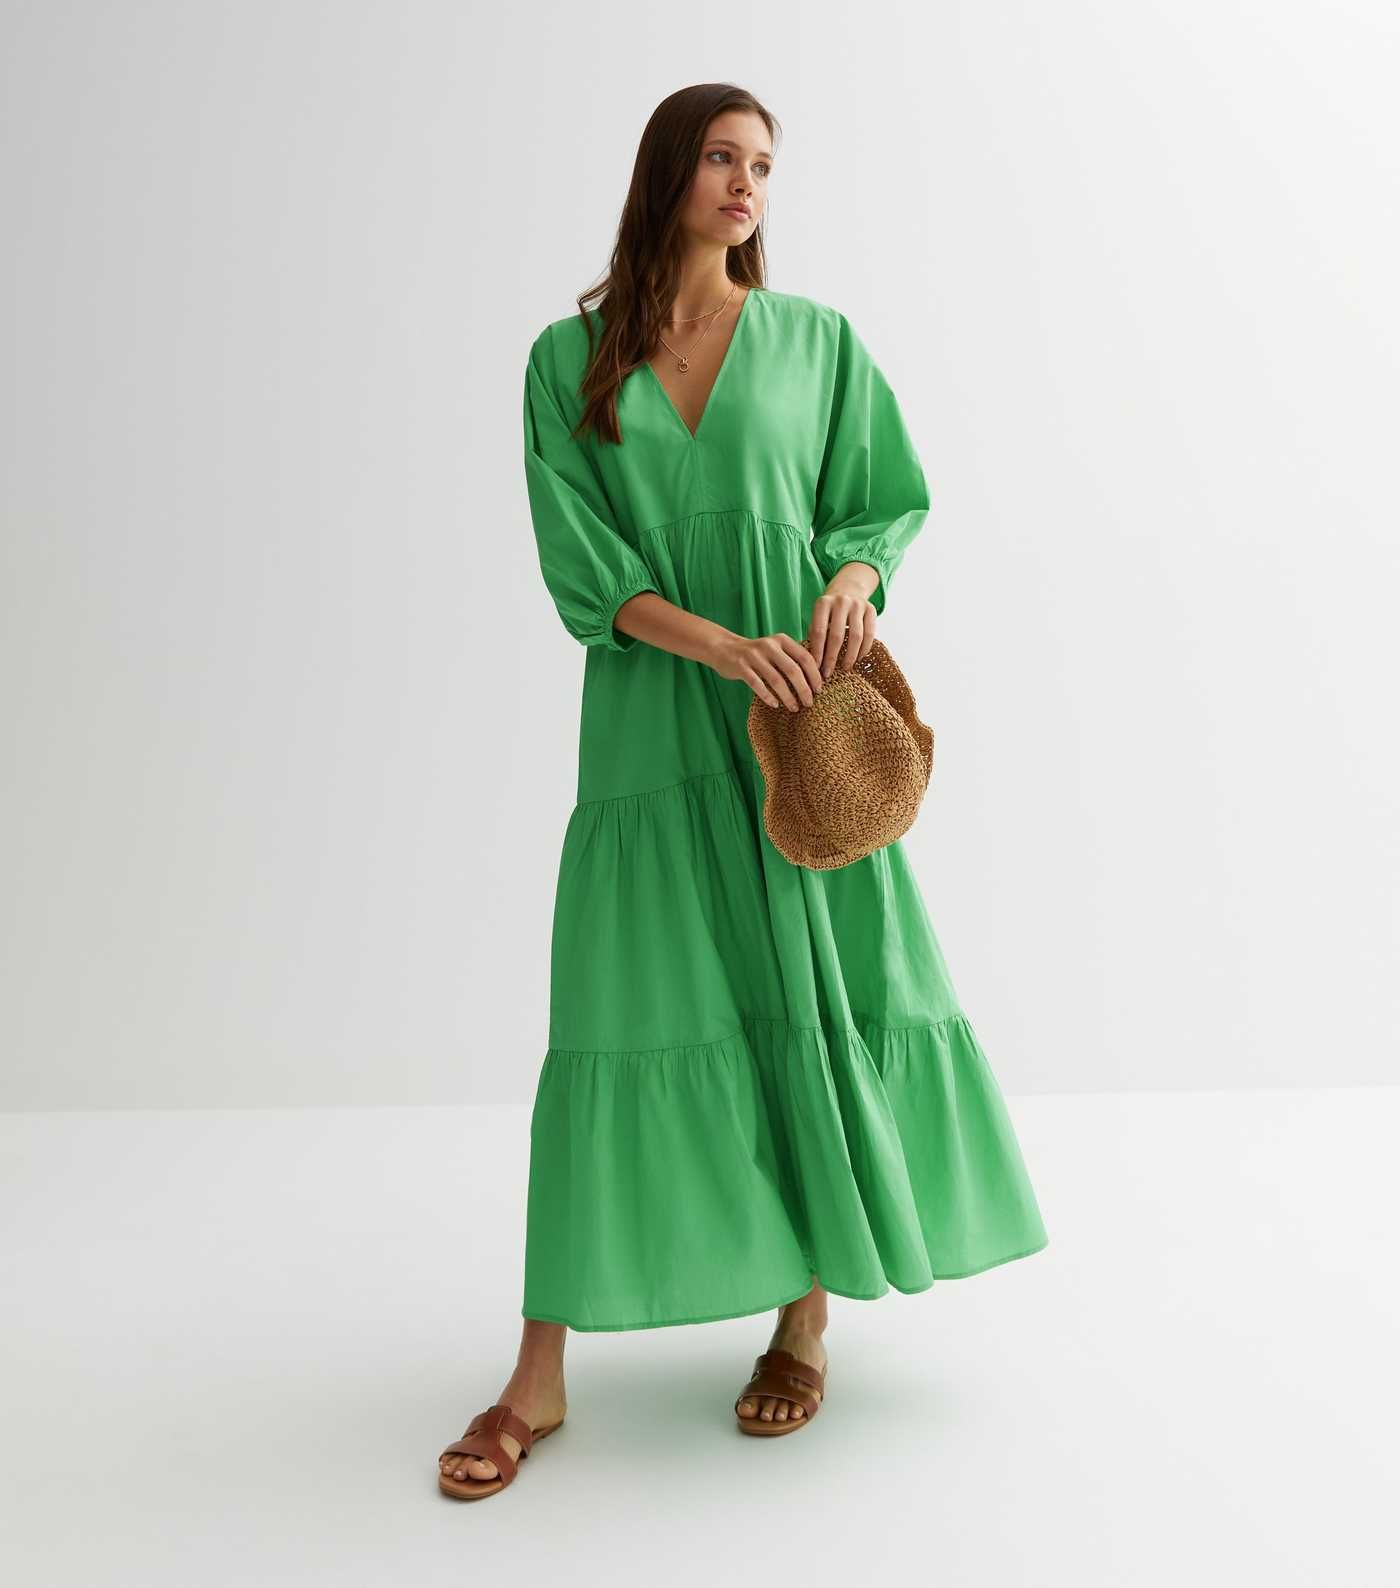 Green Puff Sleeve Tiered Maxi Dress
						
						Add to Saved Items
						Remove from Saved Items | New Look (UK)